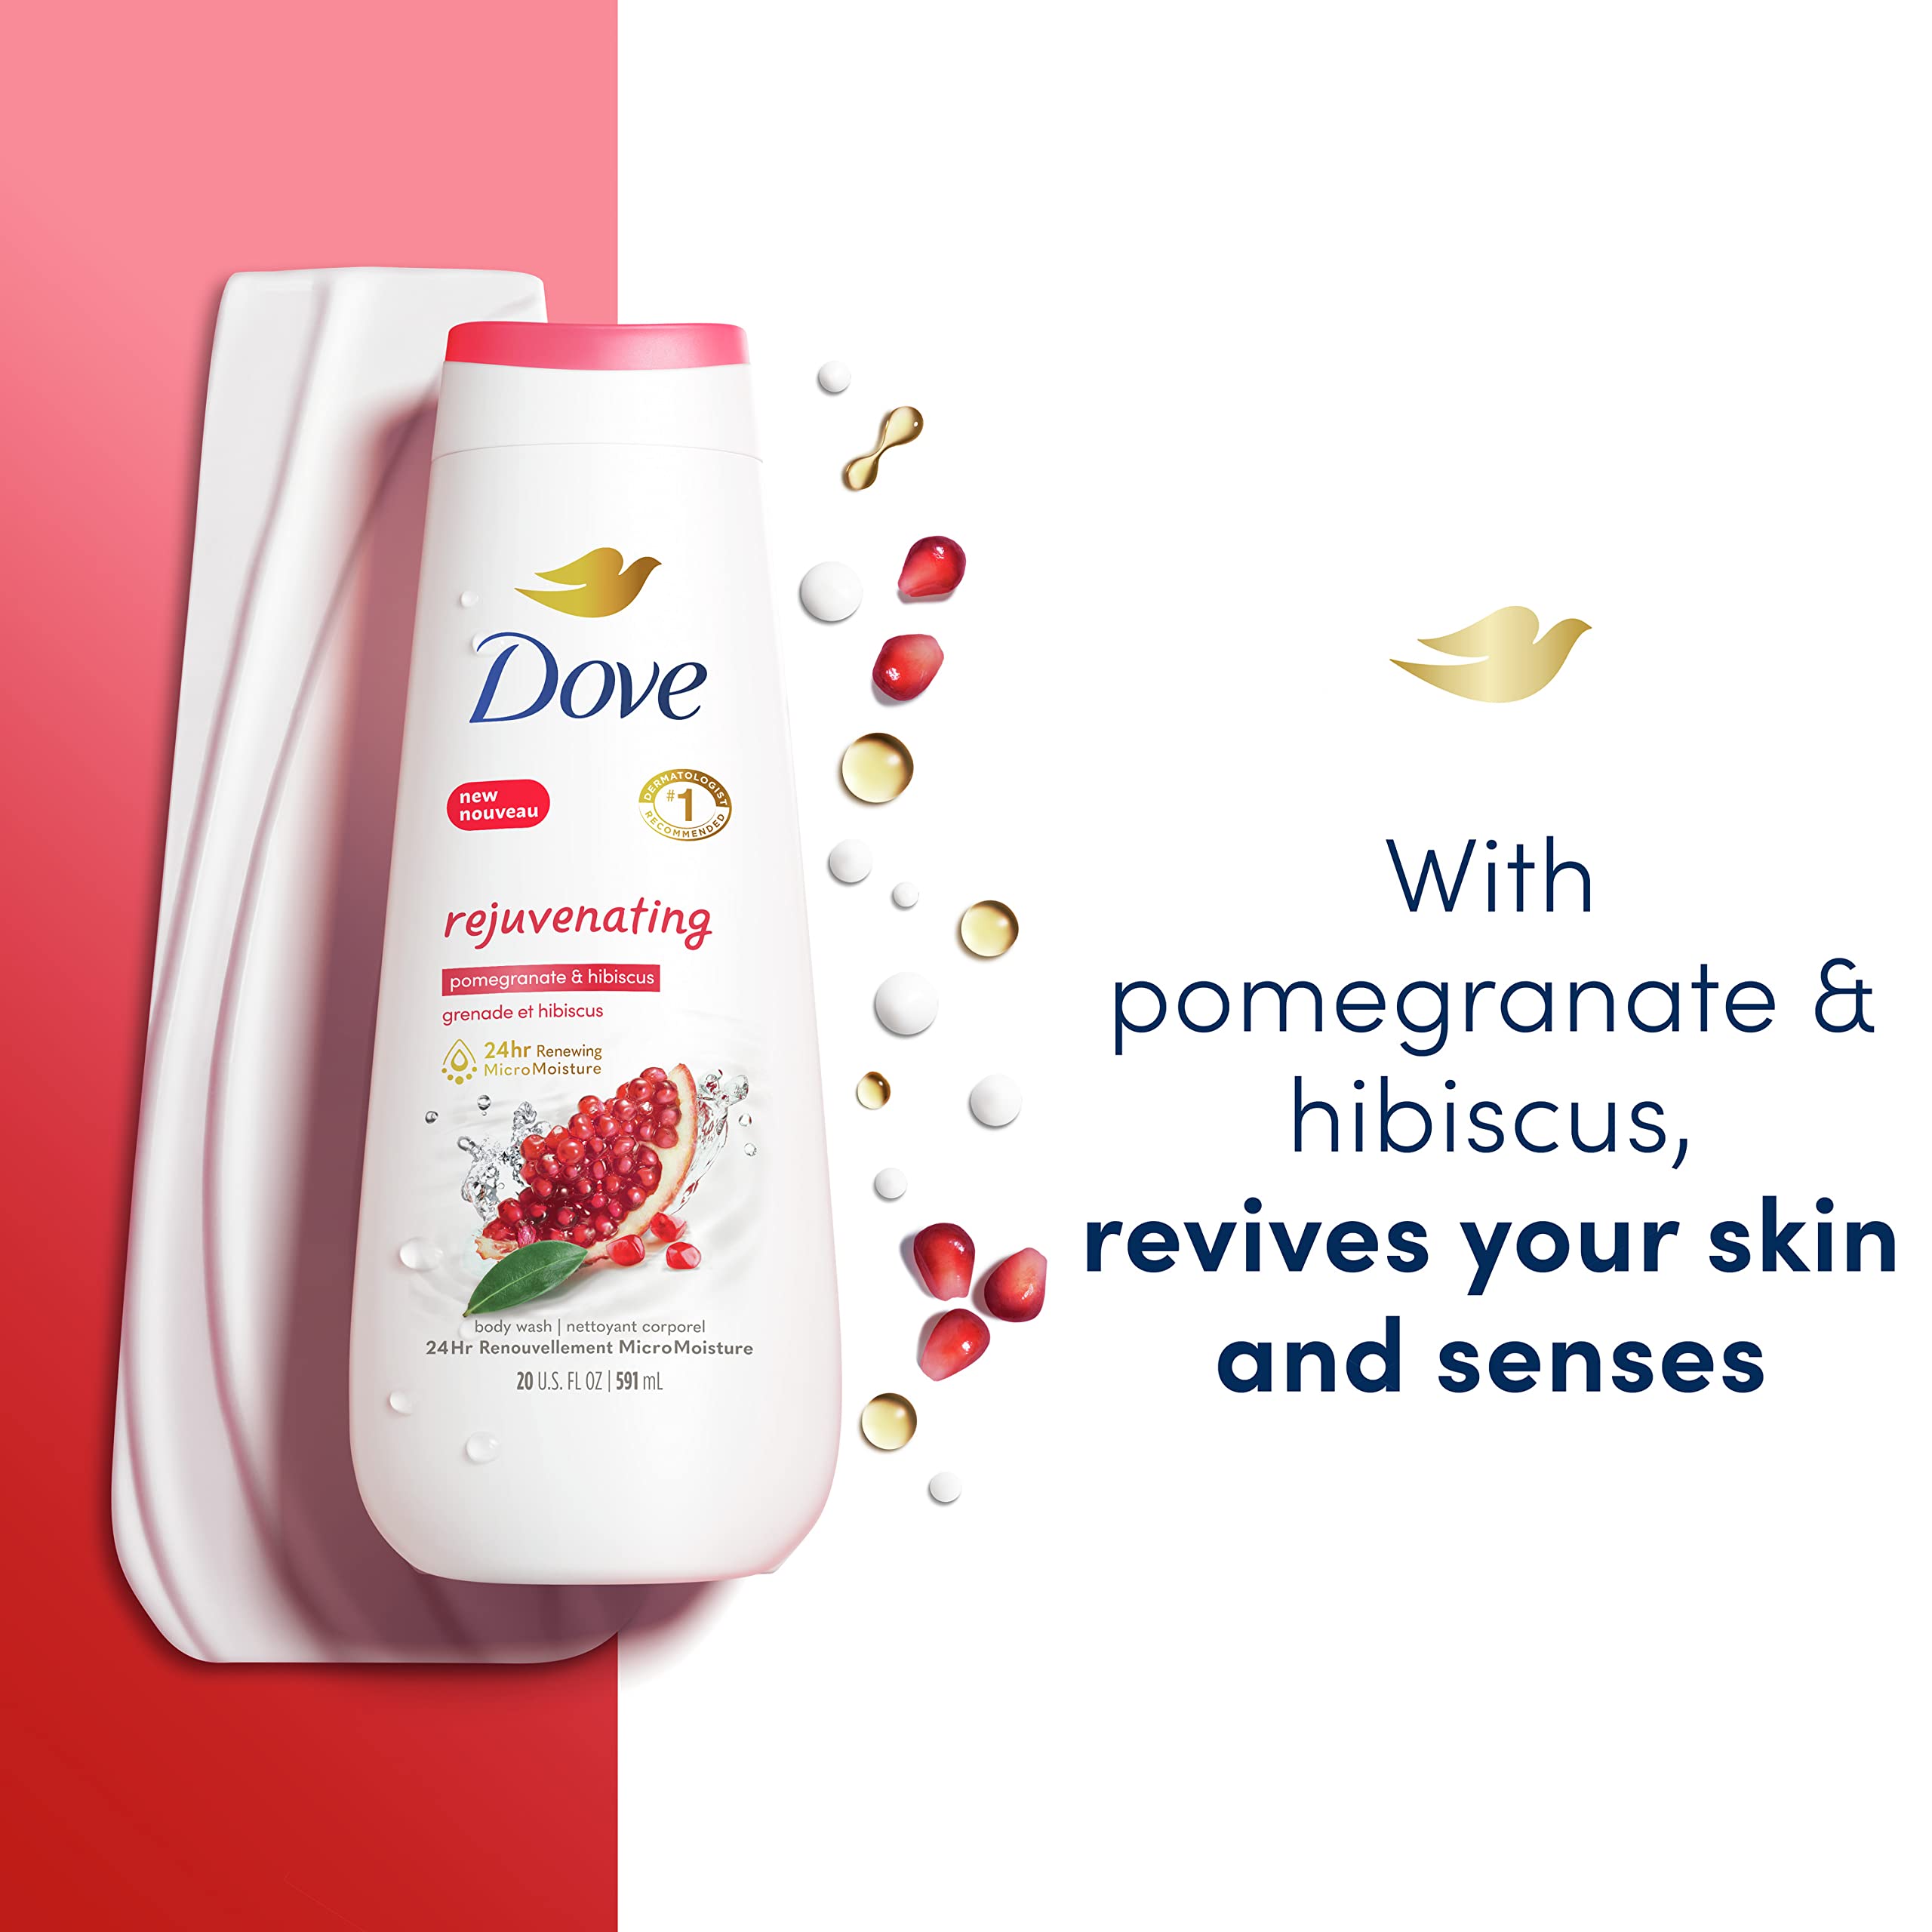 Dove Body Wash Rejuvenating Pomegranate & Hibiscus 4 Count for Renewed, Healthy-Looking Skin Gentle Skin Cleanser with 24hr Renewing MicroMoisture 20 oz